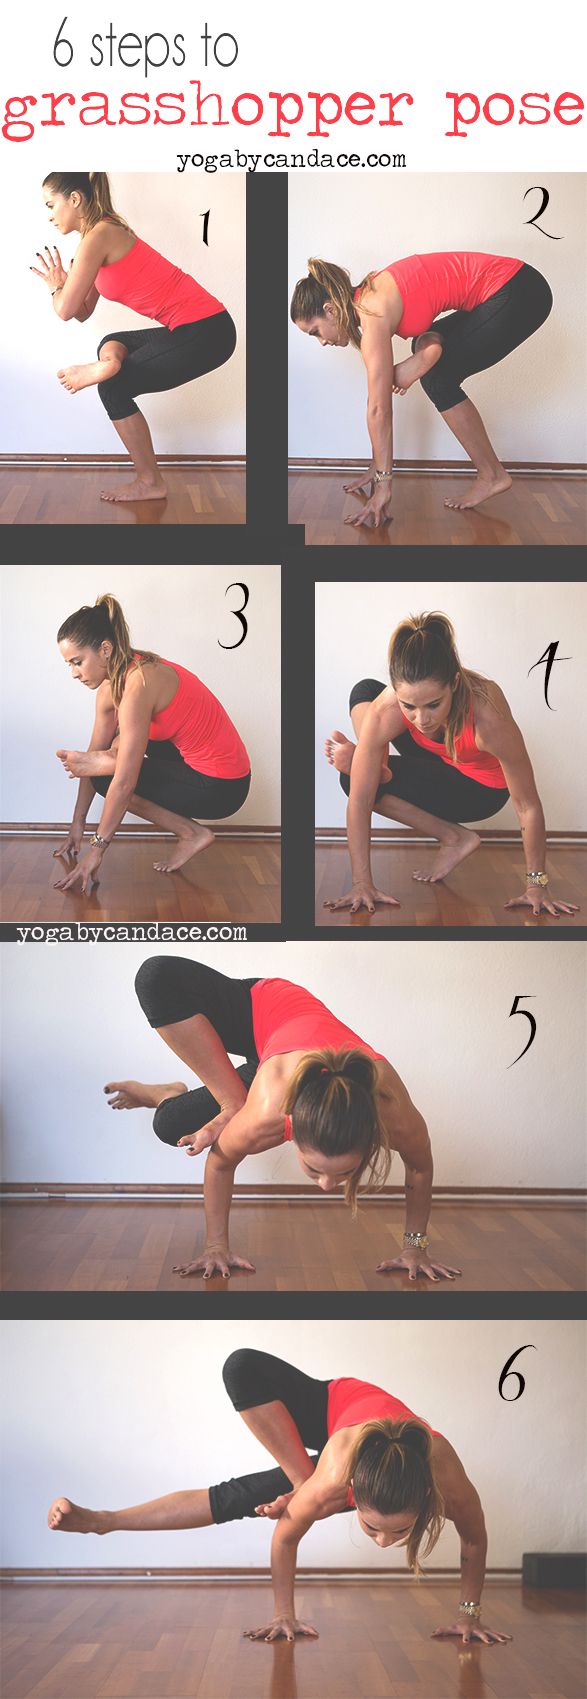 ☆ YOGA POSES ☆: I'm often asked for poses to practice once crow pose has...